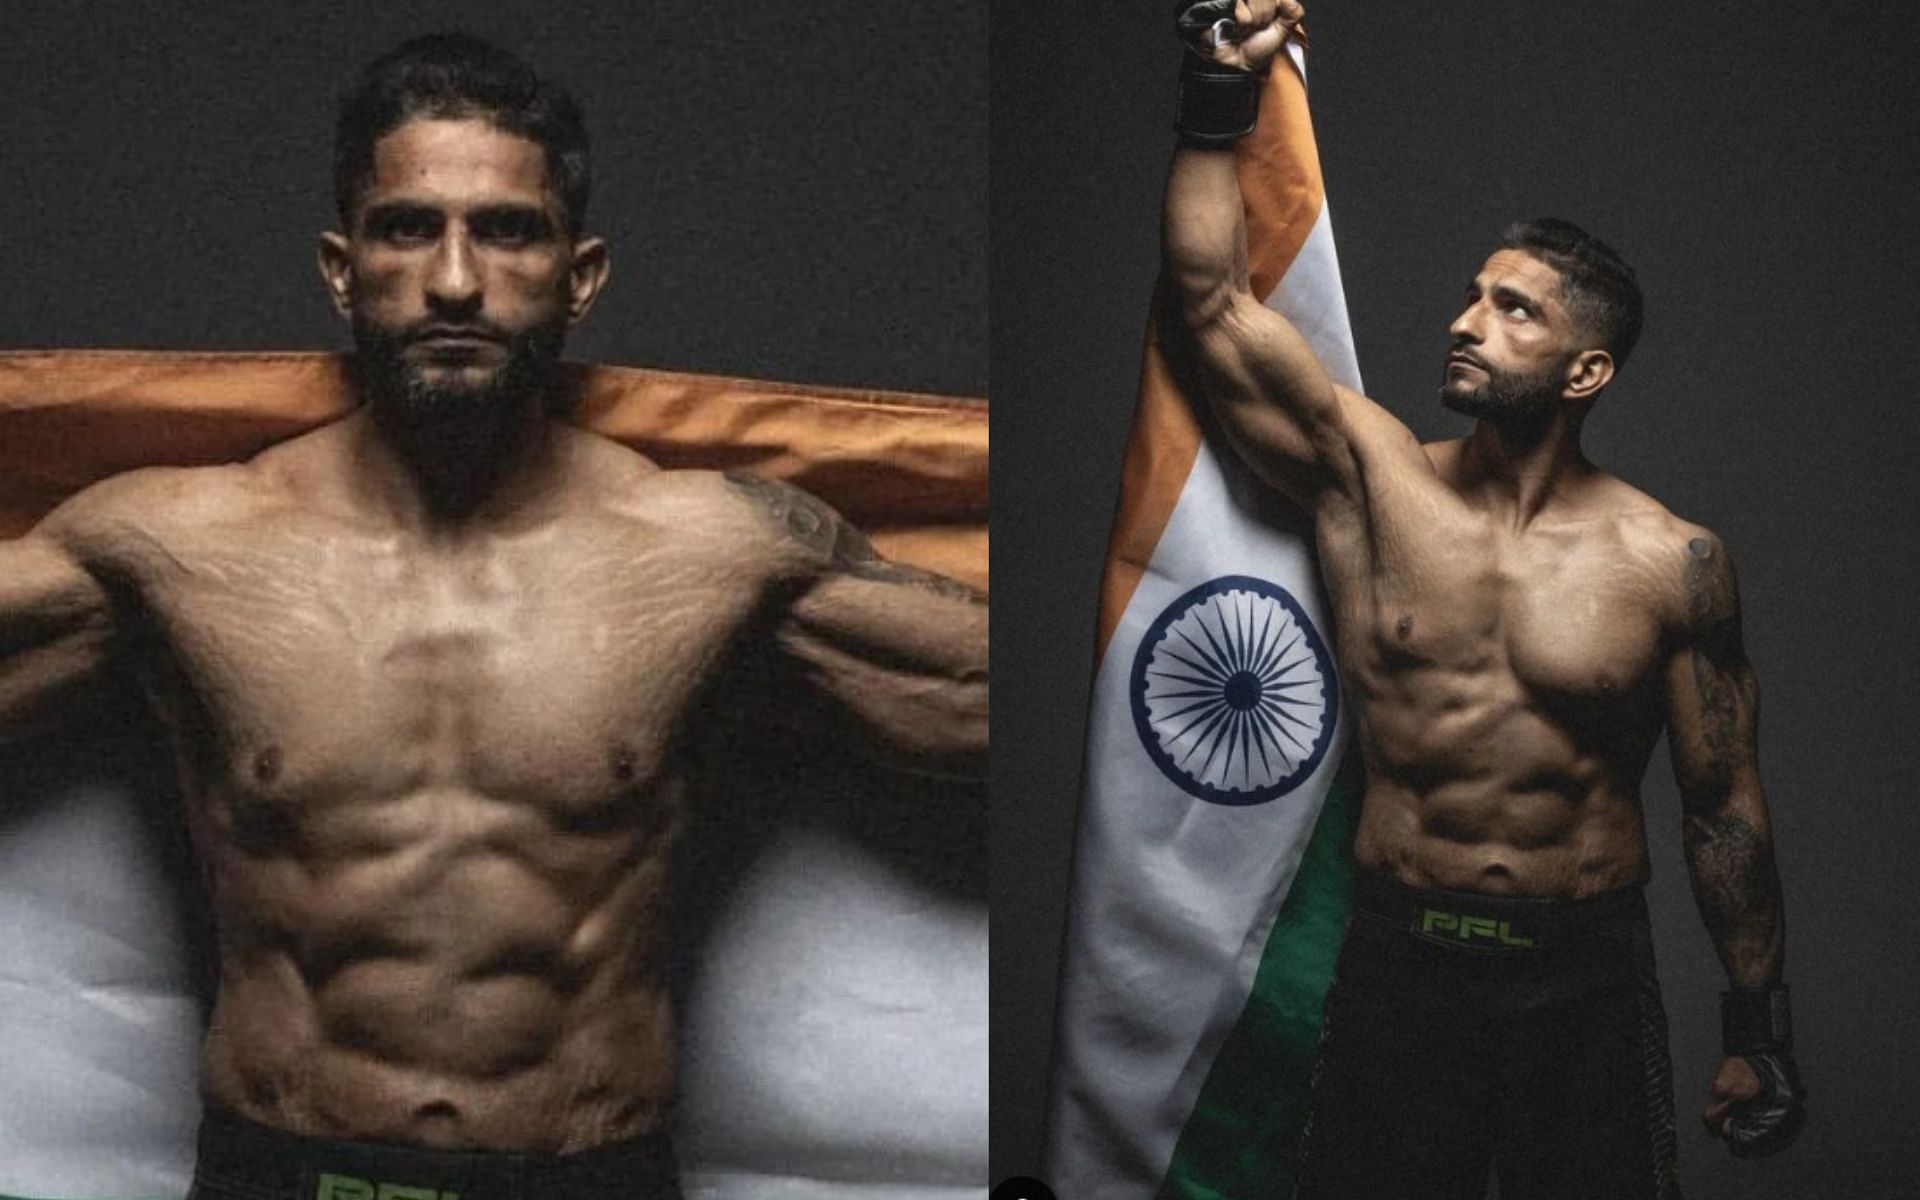 Vikas Singh Ruhil set to make history as first Indian and South Asian MMA fighter to sign with PFL